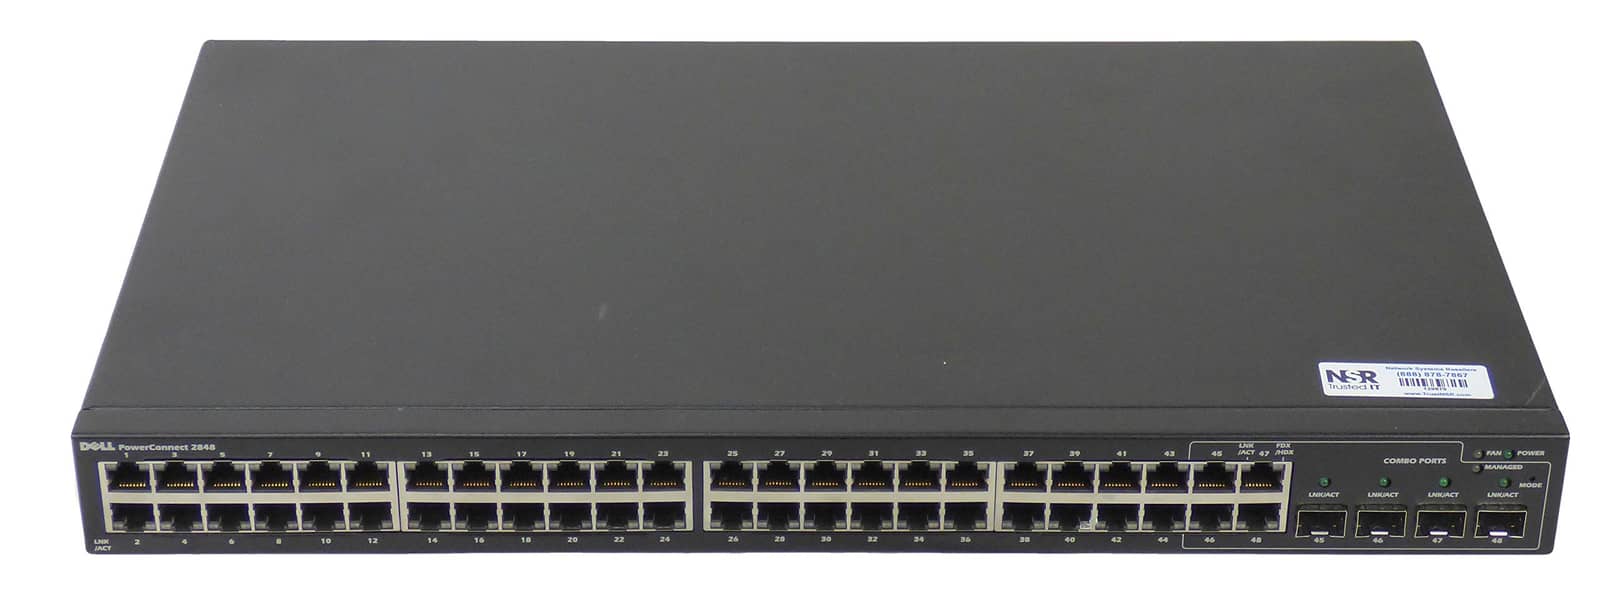 dell powerconnect switch GIGA 48port new pox pack 1